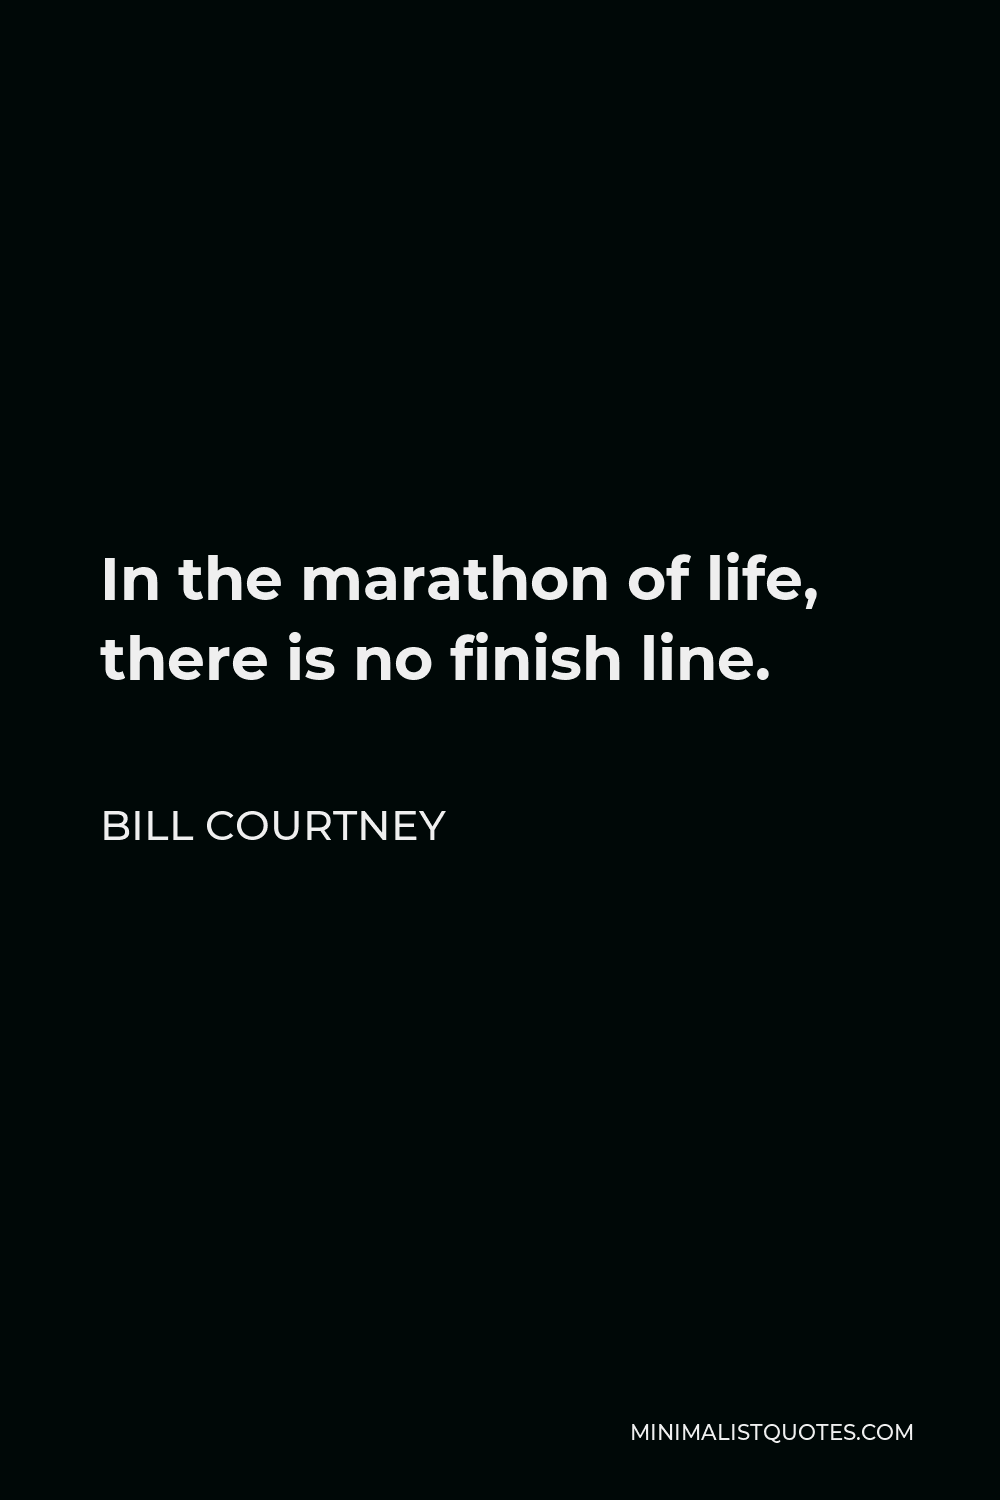 Bill Courtney Quote - In the marathon of life, there is no finish line.